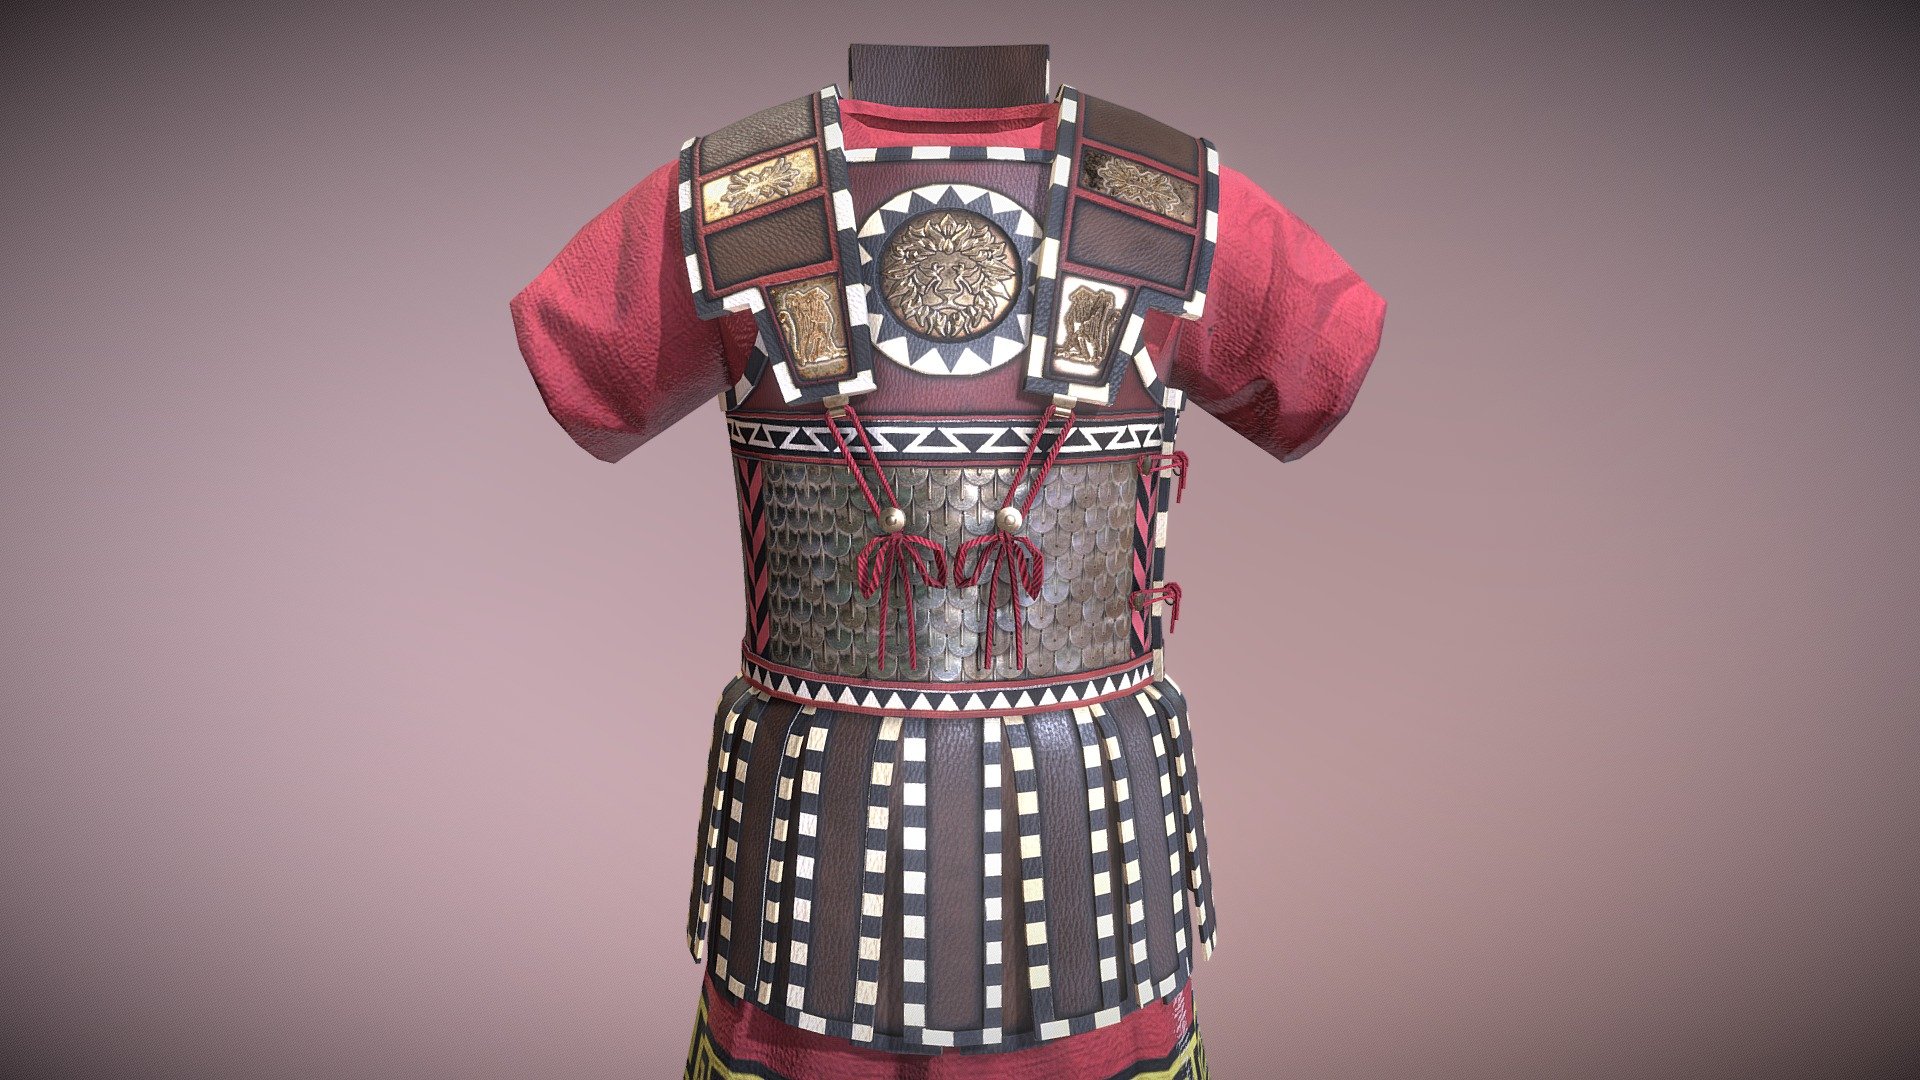 3d model of a real life linothorax, weighting over 40 pounds! Model has been made to be used in the mod Imperium Surrectum for the game Rome TW: Remastered.

This was the very first project i made while actually understanding how the PBR textures interacts with each other. Also, textures on this particular model were &ldquo;handmade